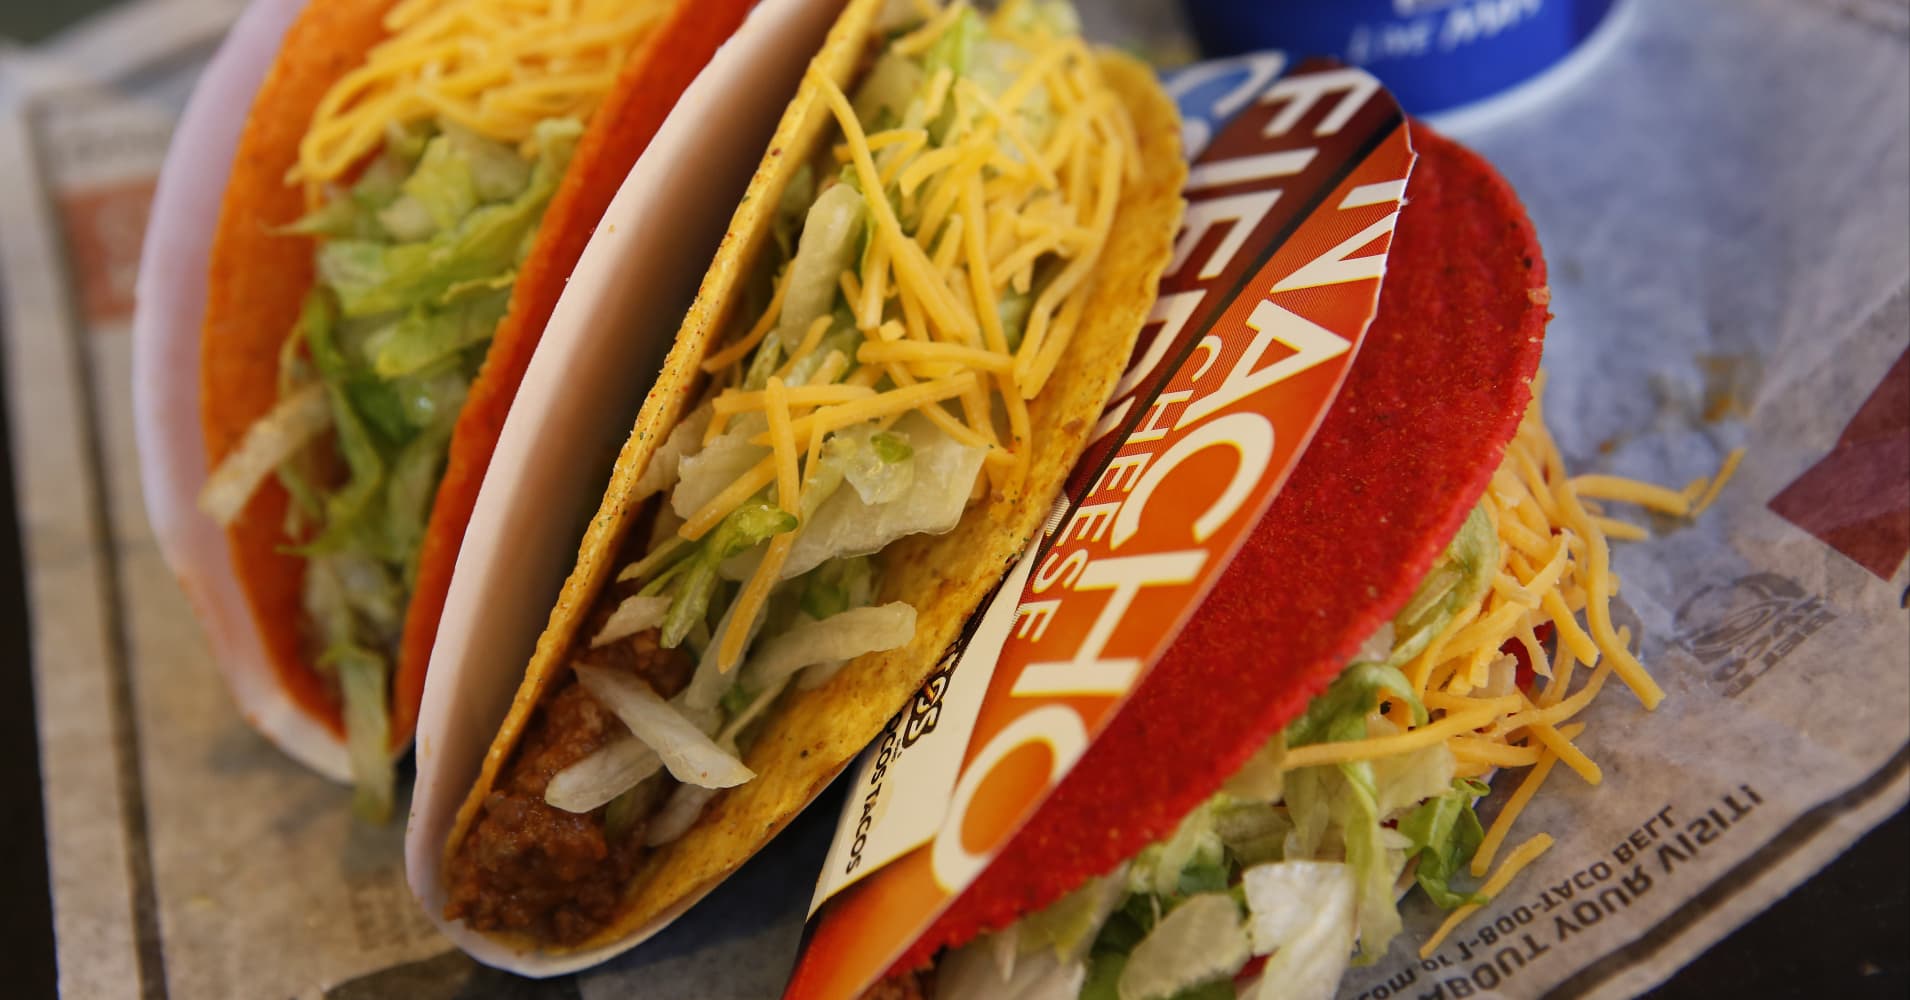 Taco Bell Bets Big on China